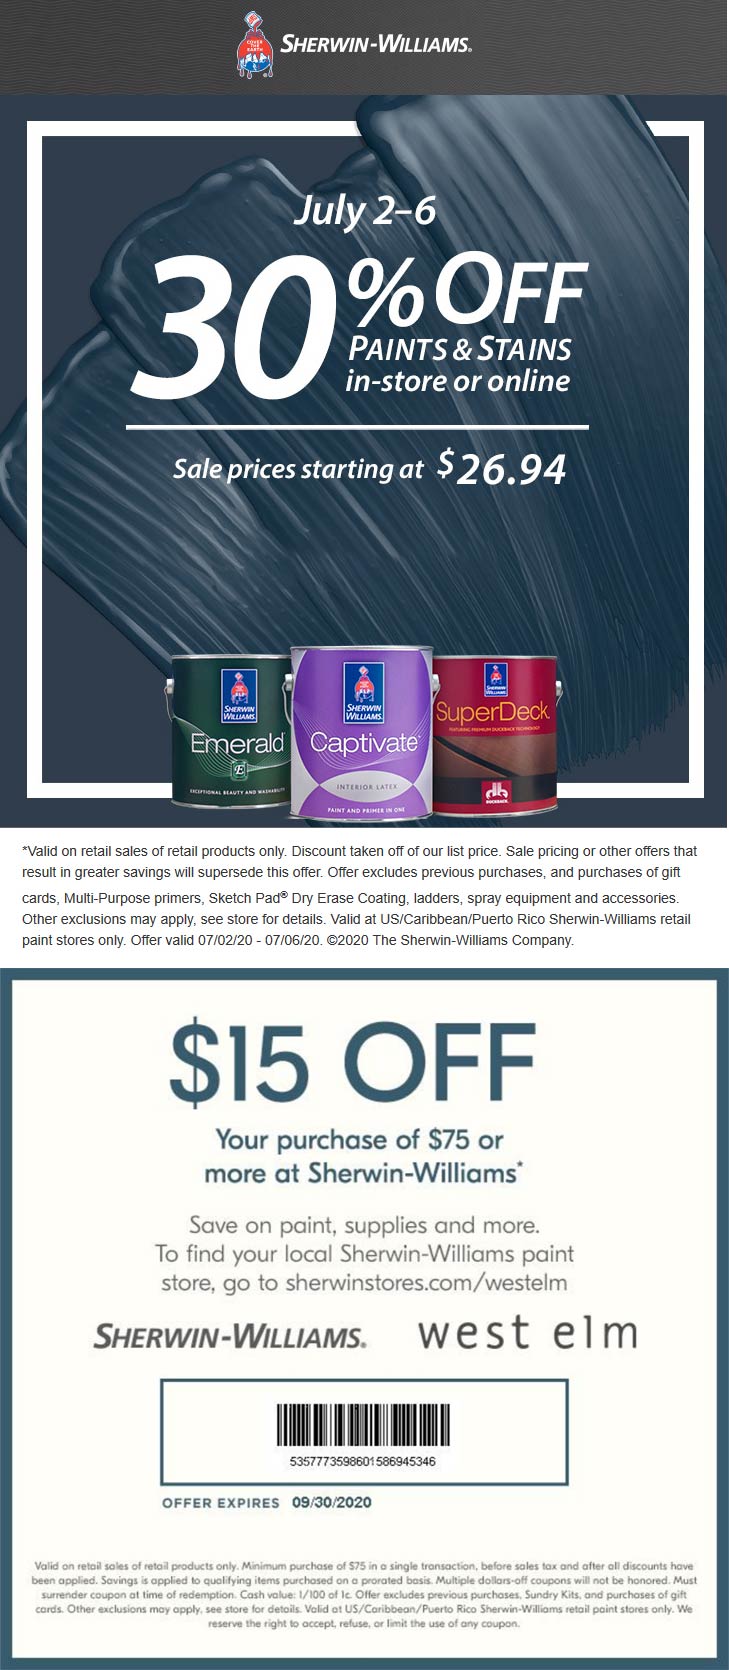 30 off paints & stains at Sherwin Williams, ditto online 